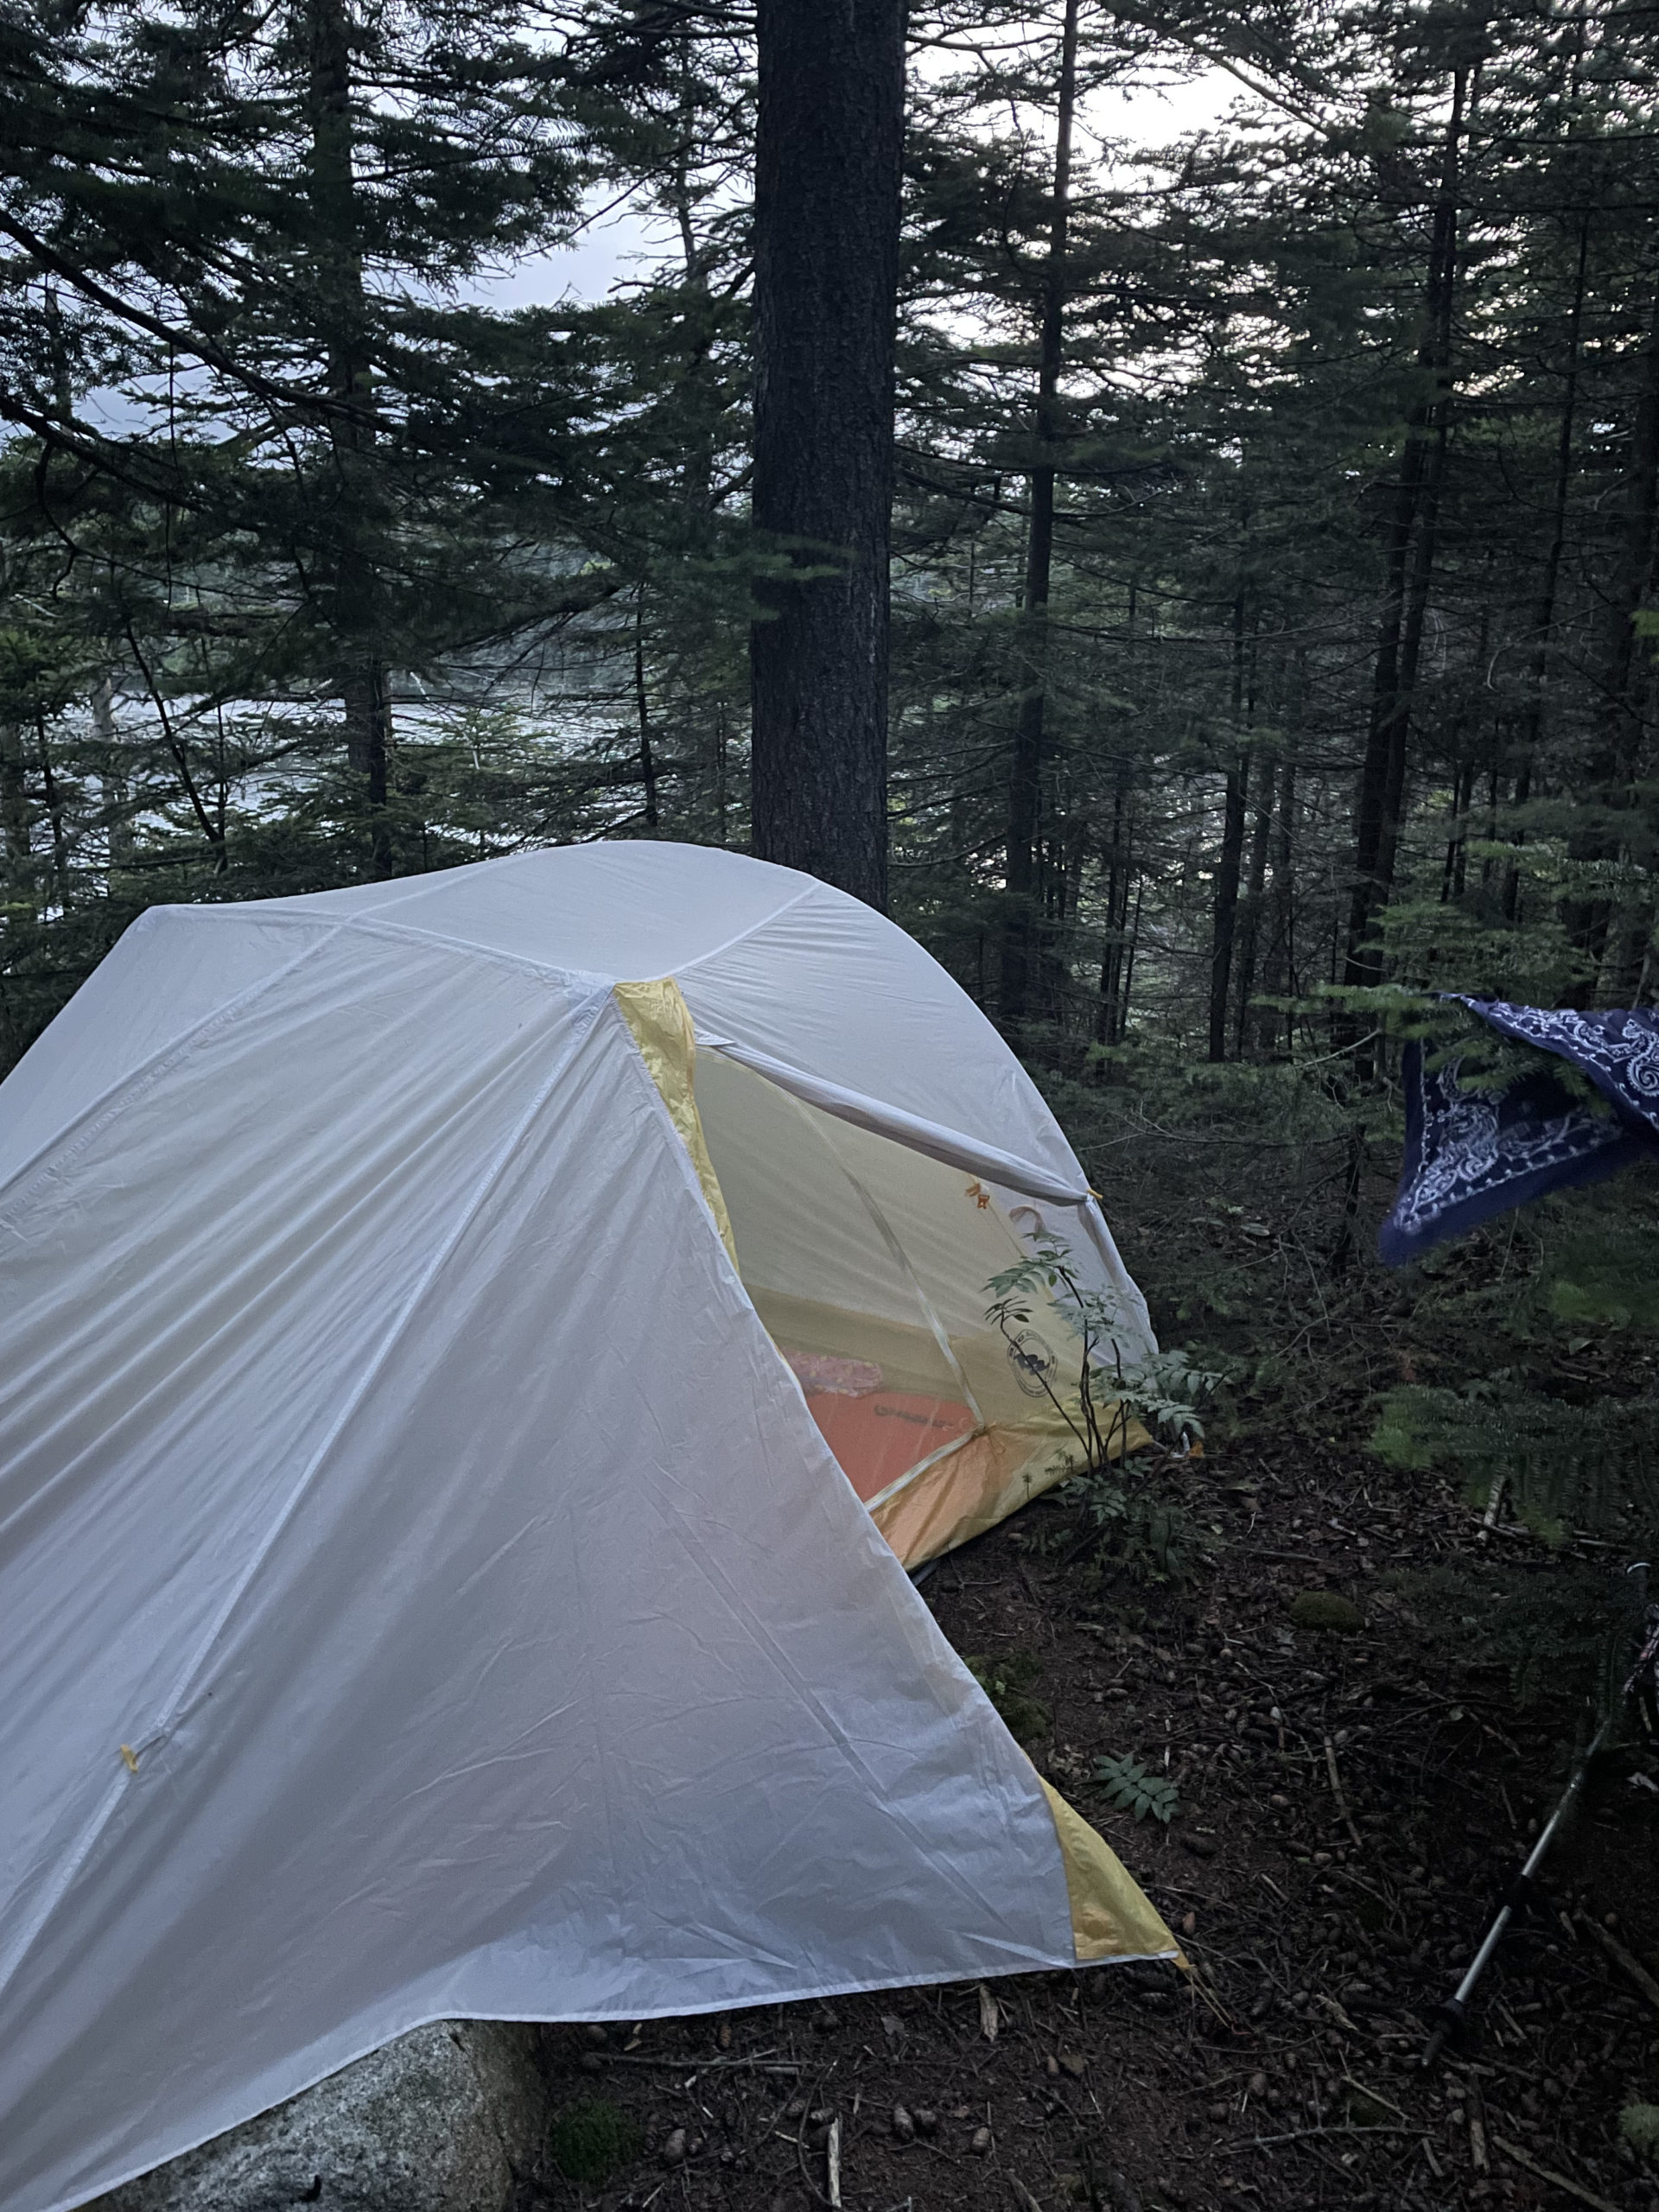 Tent at Unknown Pond, seen while hiking Mt. Waumbek and Mt. Cabot in the White Mountain National Forest, New Hampshire